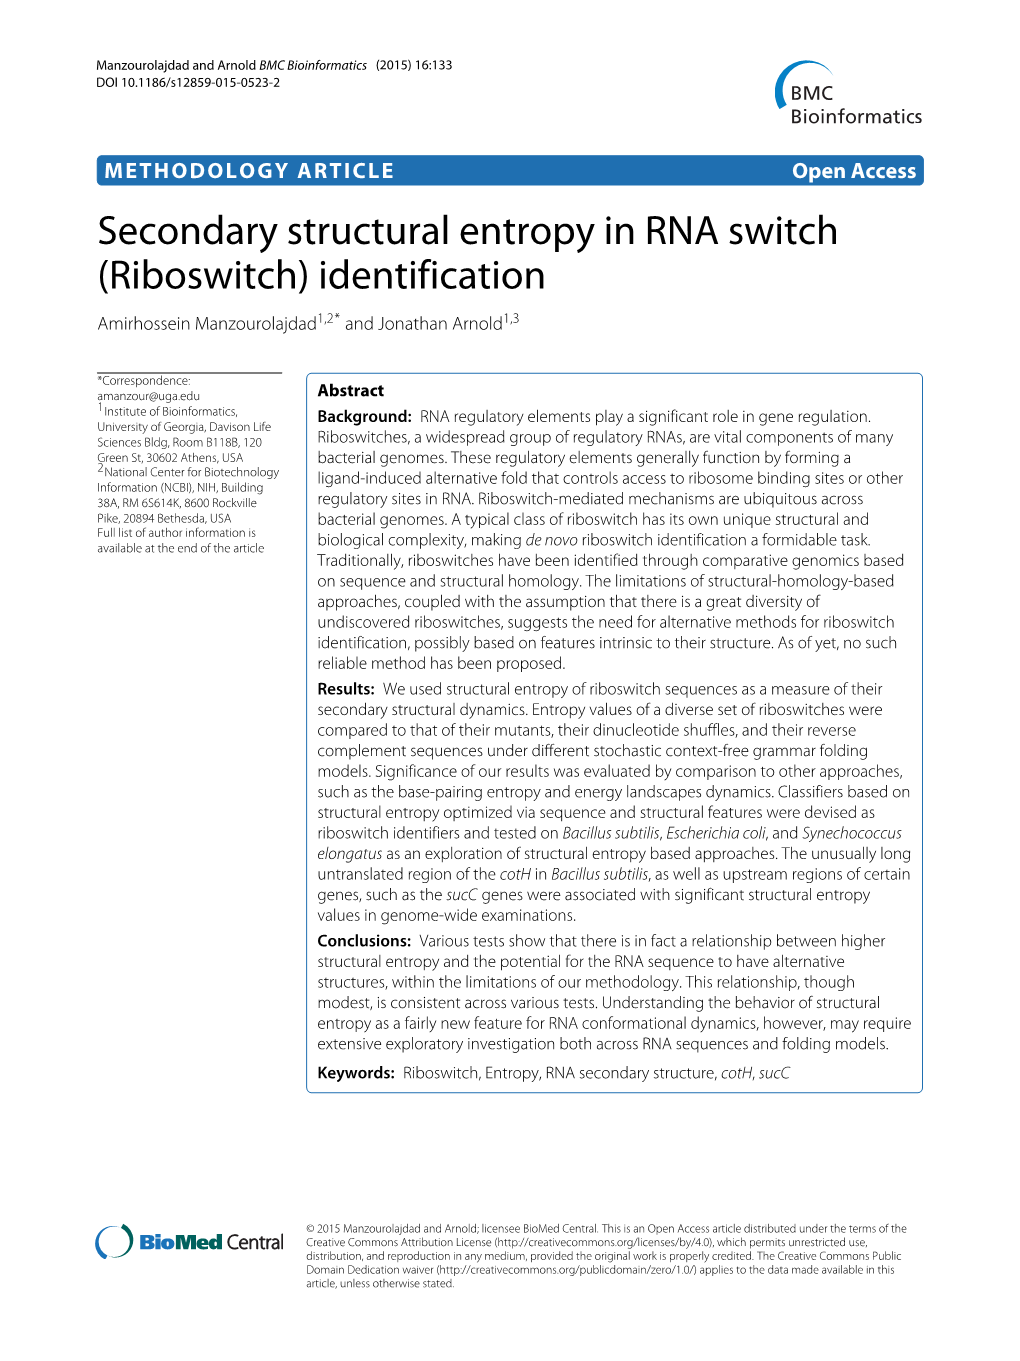 Secondary Structural Entropy in RNA Switch (Riboswitch) Identification Amirhossein Manzourolajdad1,2* and Jonathan Arnold1,3